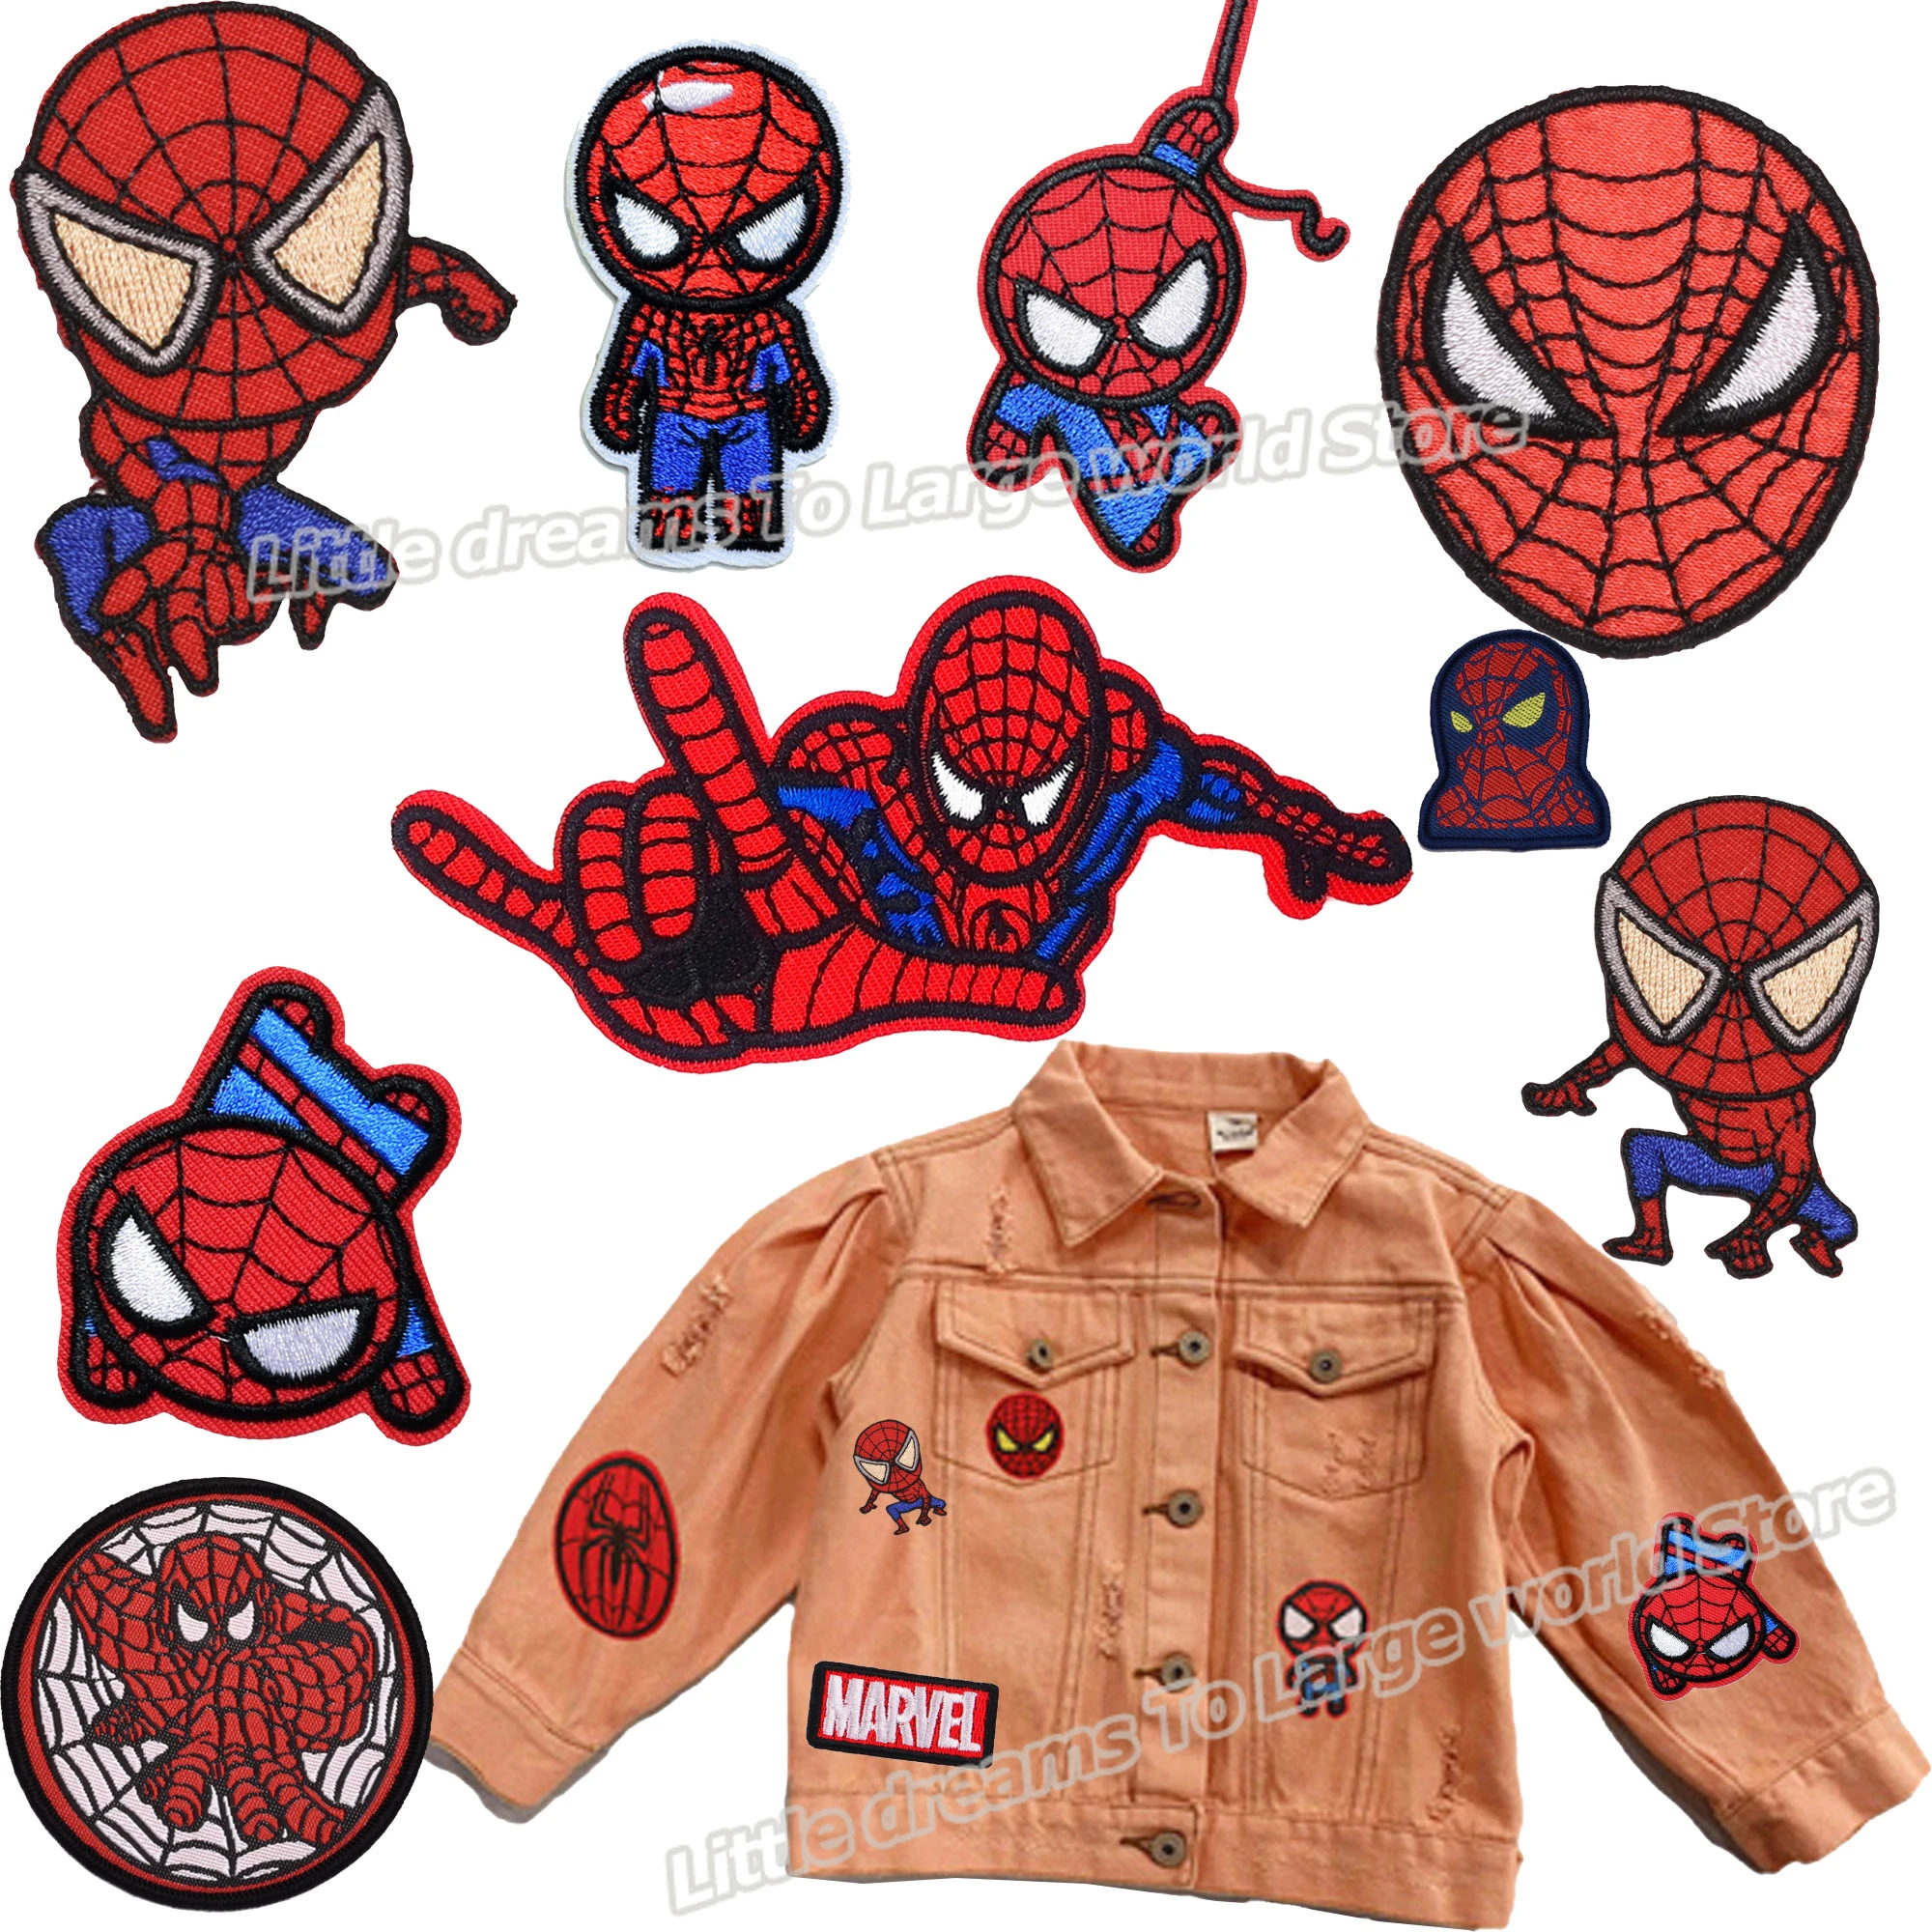 Patches Clothes Spiderman | Spiderman Embroidered Patches | Iron Spiderman  Patches - Action Figures - Aliexpress